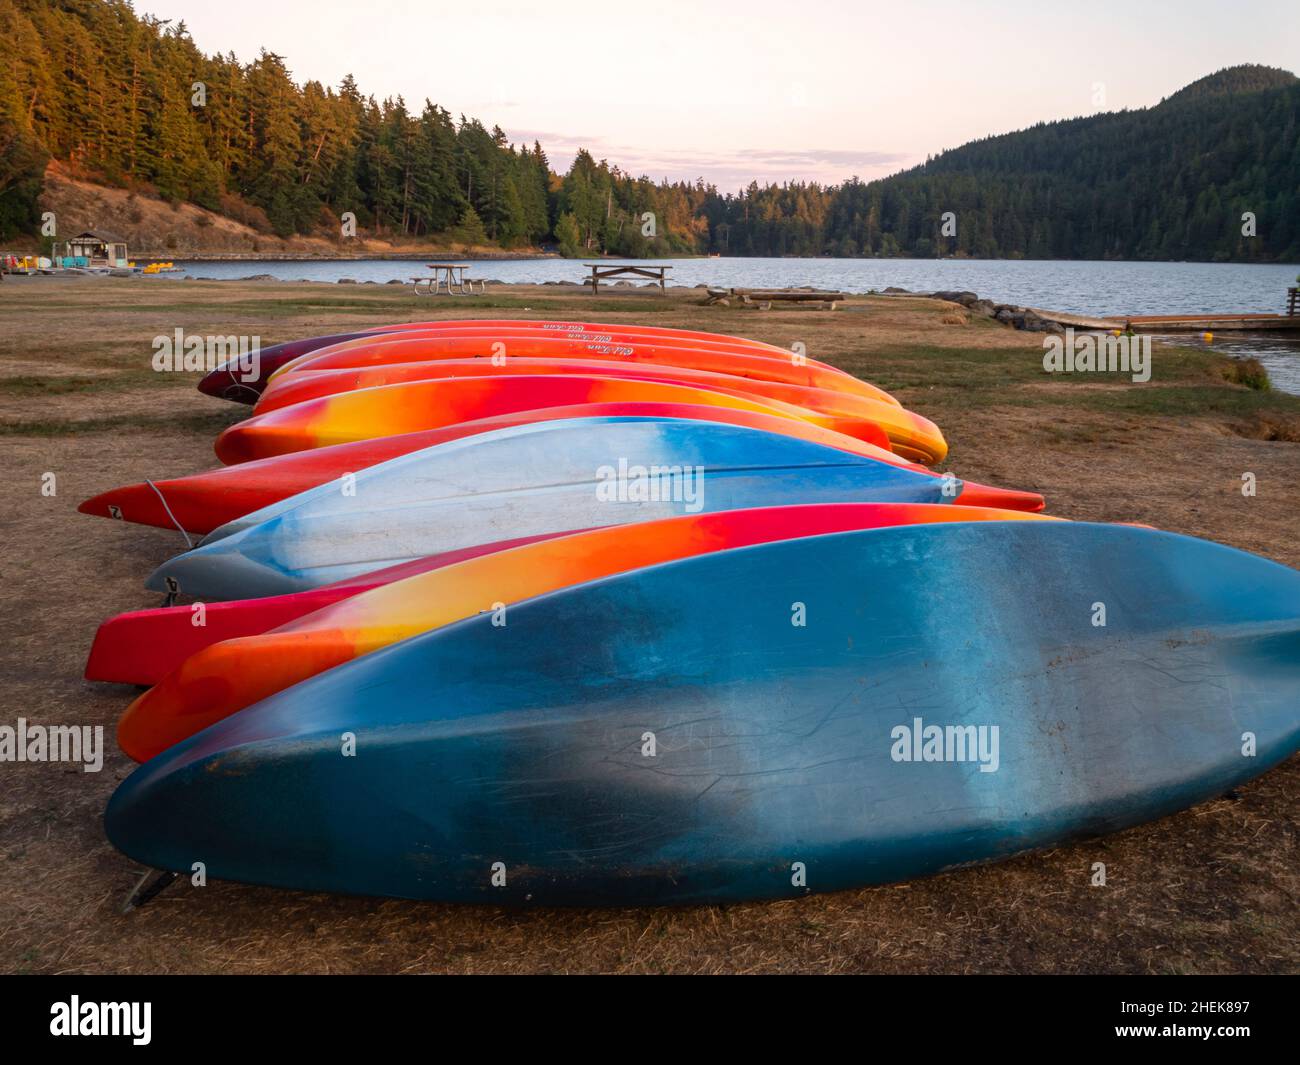 WA21054-00...WASHINGTON -Rental kayaks on the shore for the evening at Cascade Lake in Moran State Park on Orcas Island; one of the San Juan Islands. Stock Photo